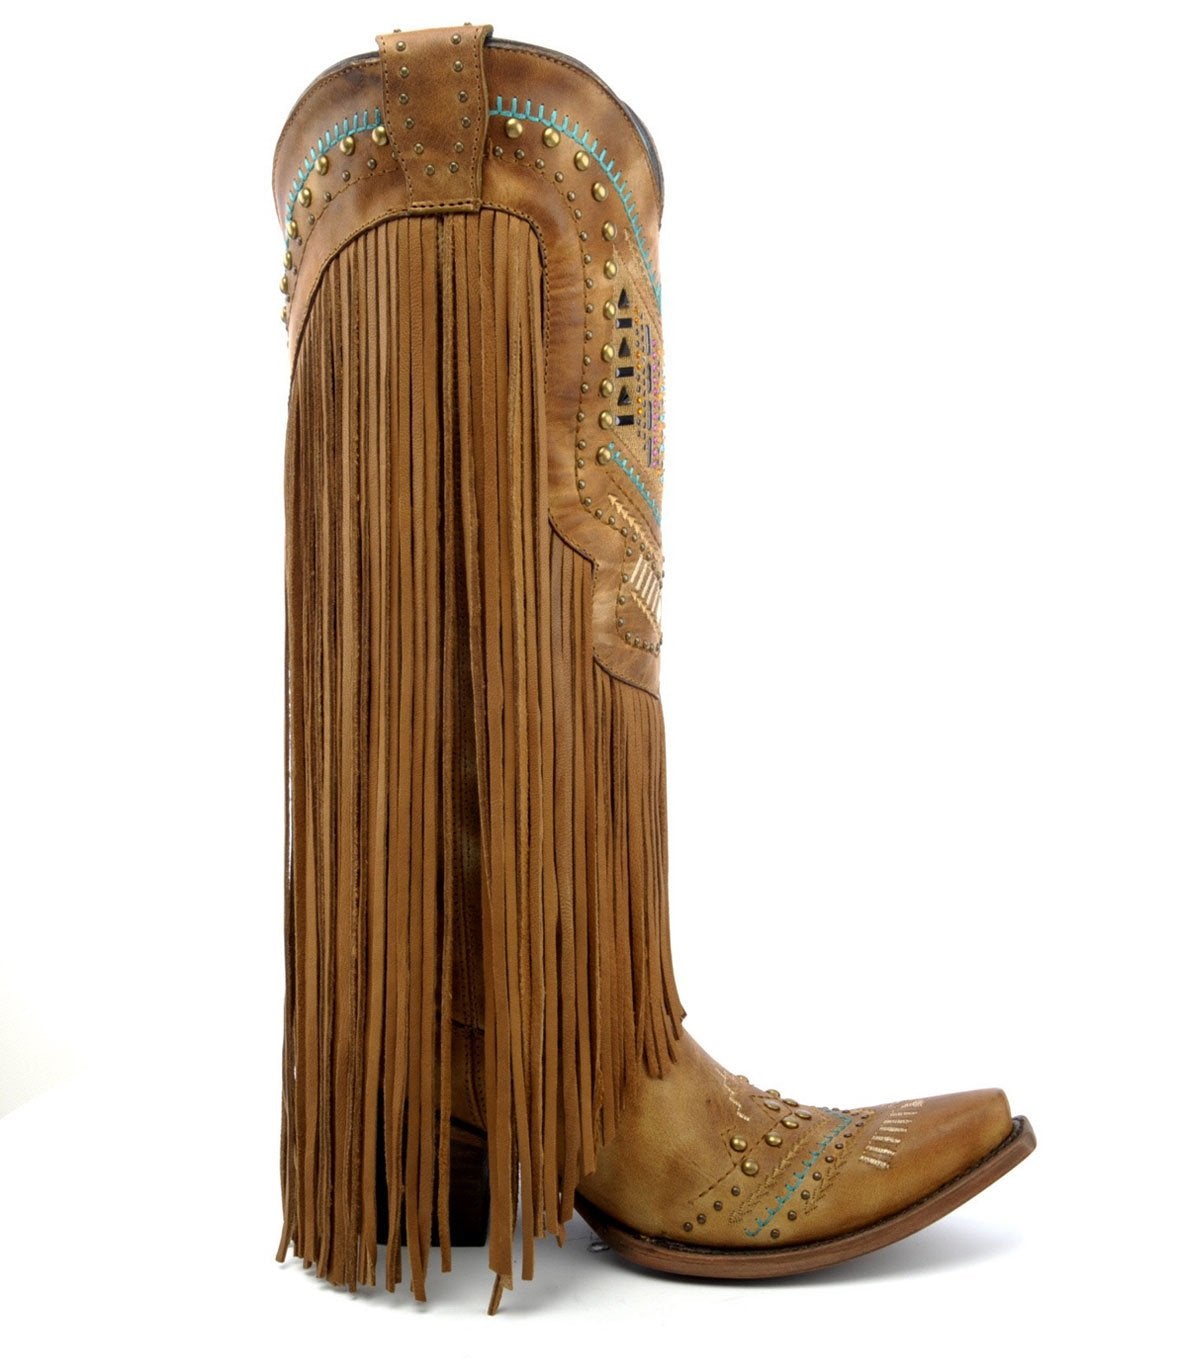 C2910 Corral Women's Tan/Multicolor Crystal Pattern and Fringe Boots